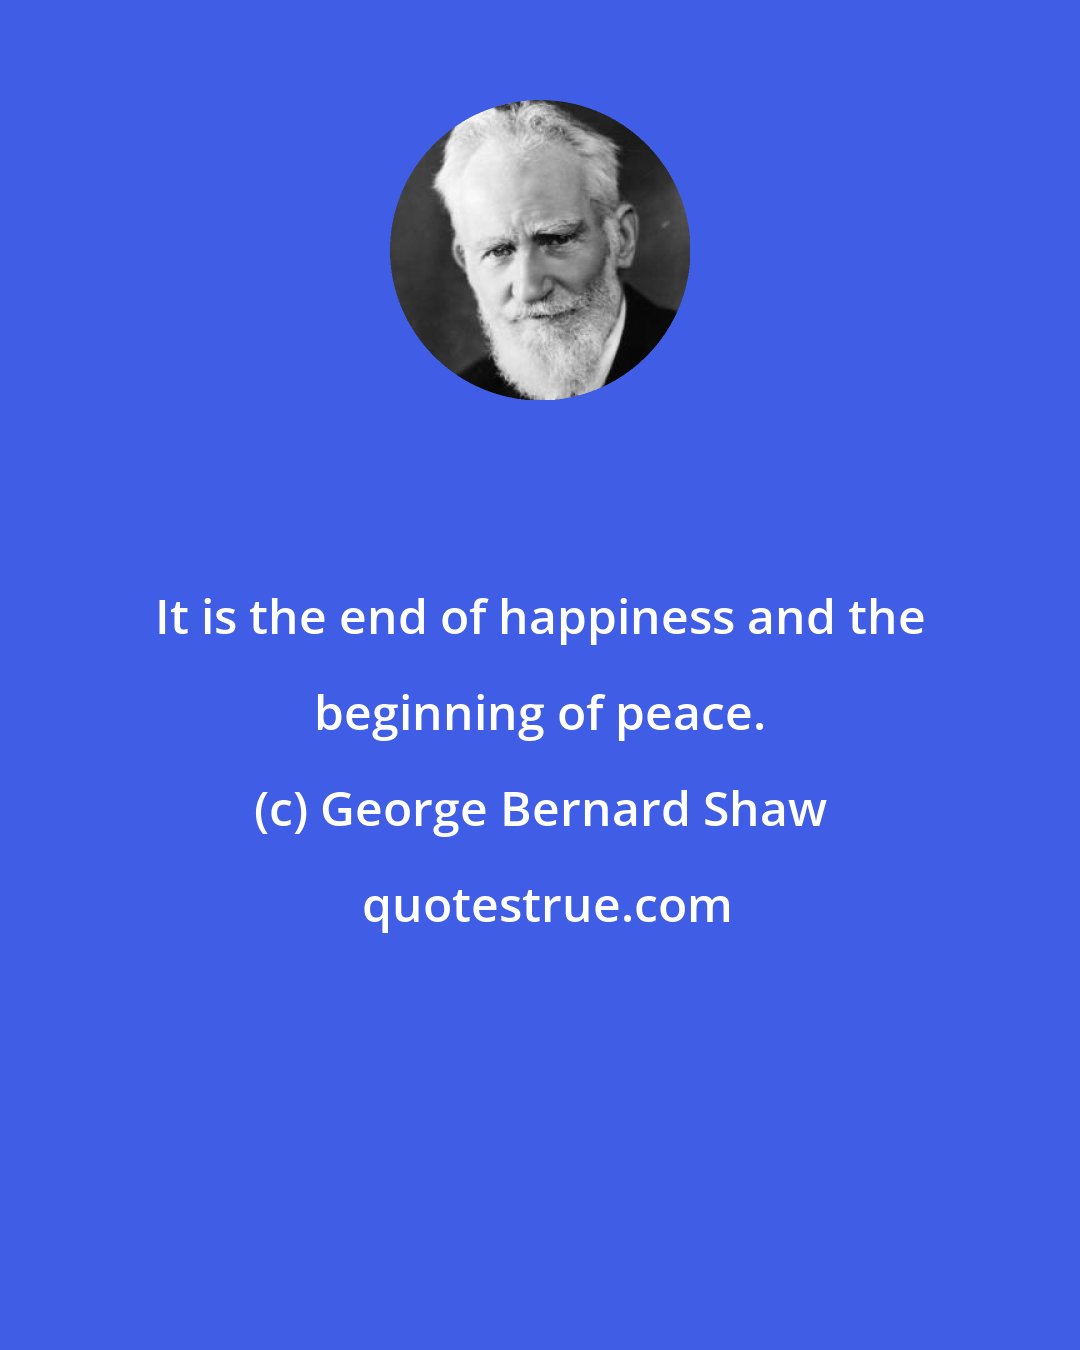 George Bernard Shaw: It is the end of happiness and the beginning of peace.